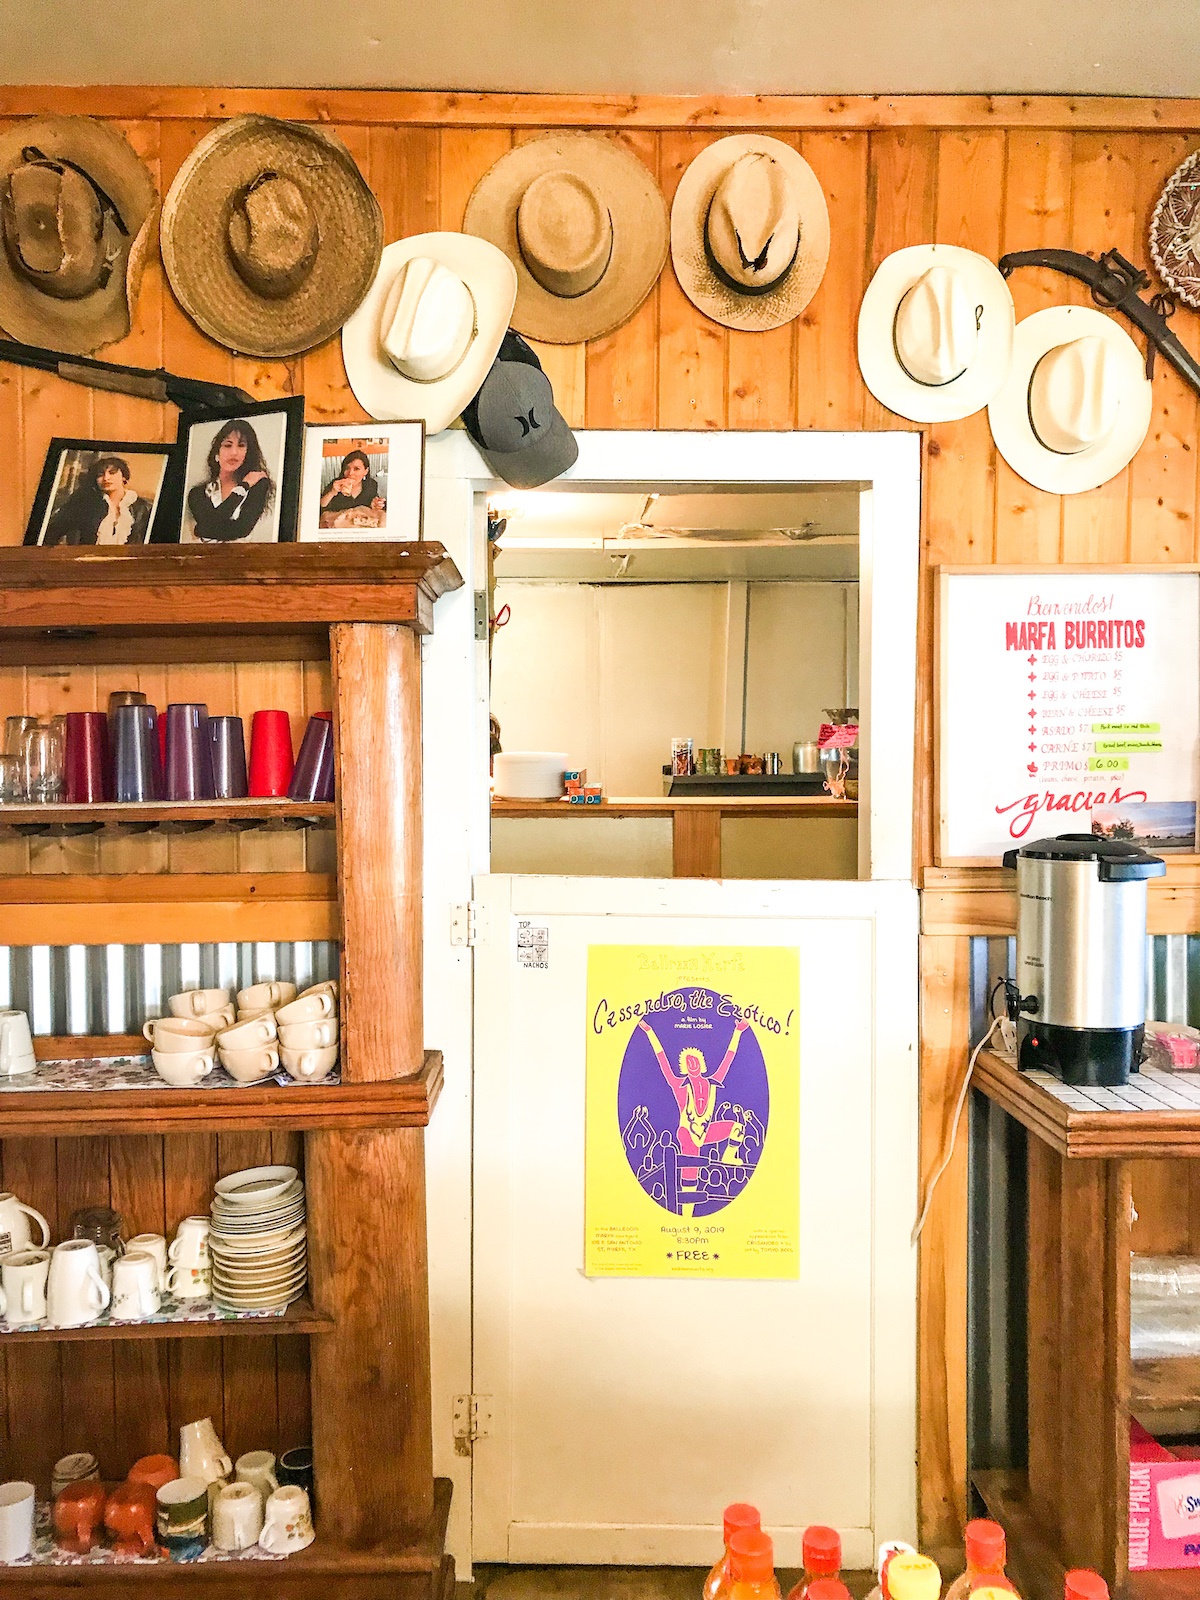 White dutch door in a wood paneled room leads to the kitchen. Cowboy hats hang above the door. To the left of the door are various cups and restaurant items as well as photos of the singer Selena. To the right of the door hangs the menu and an electric hot water container.